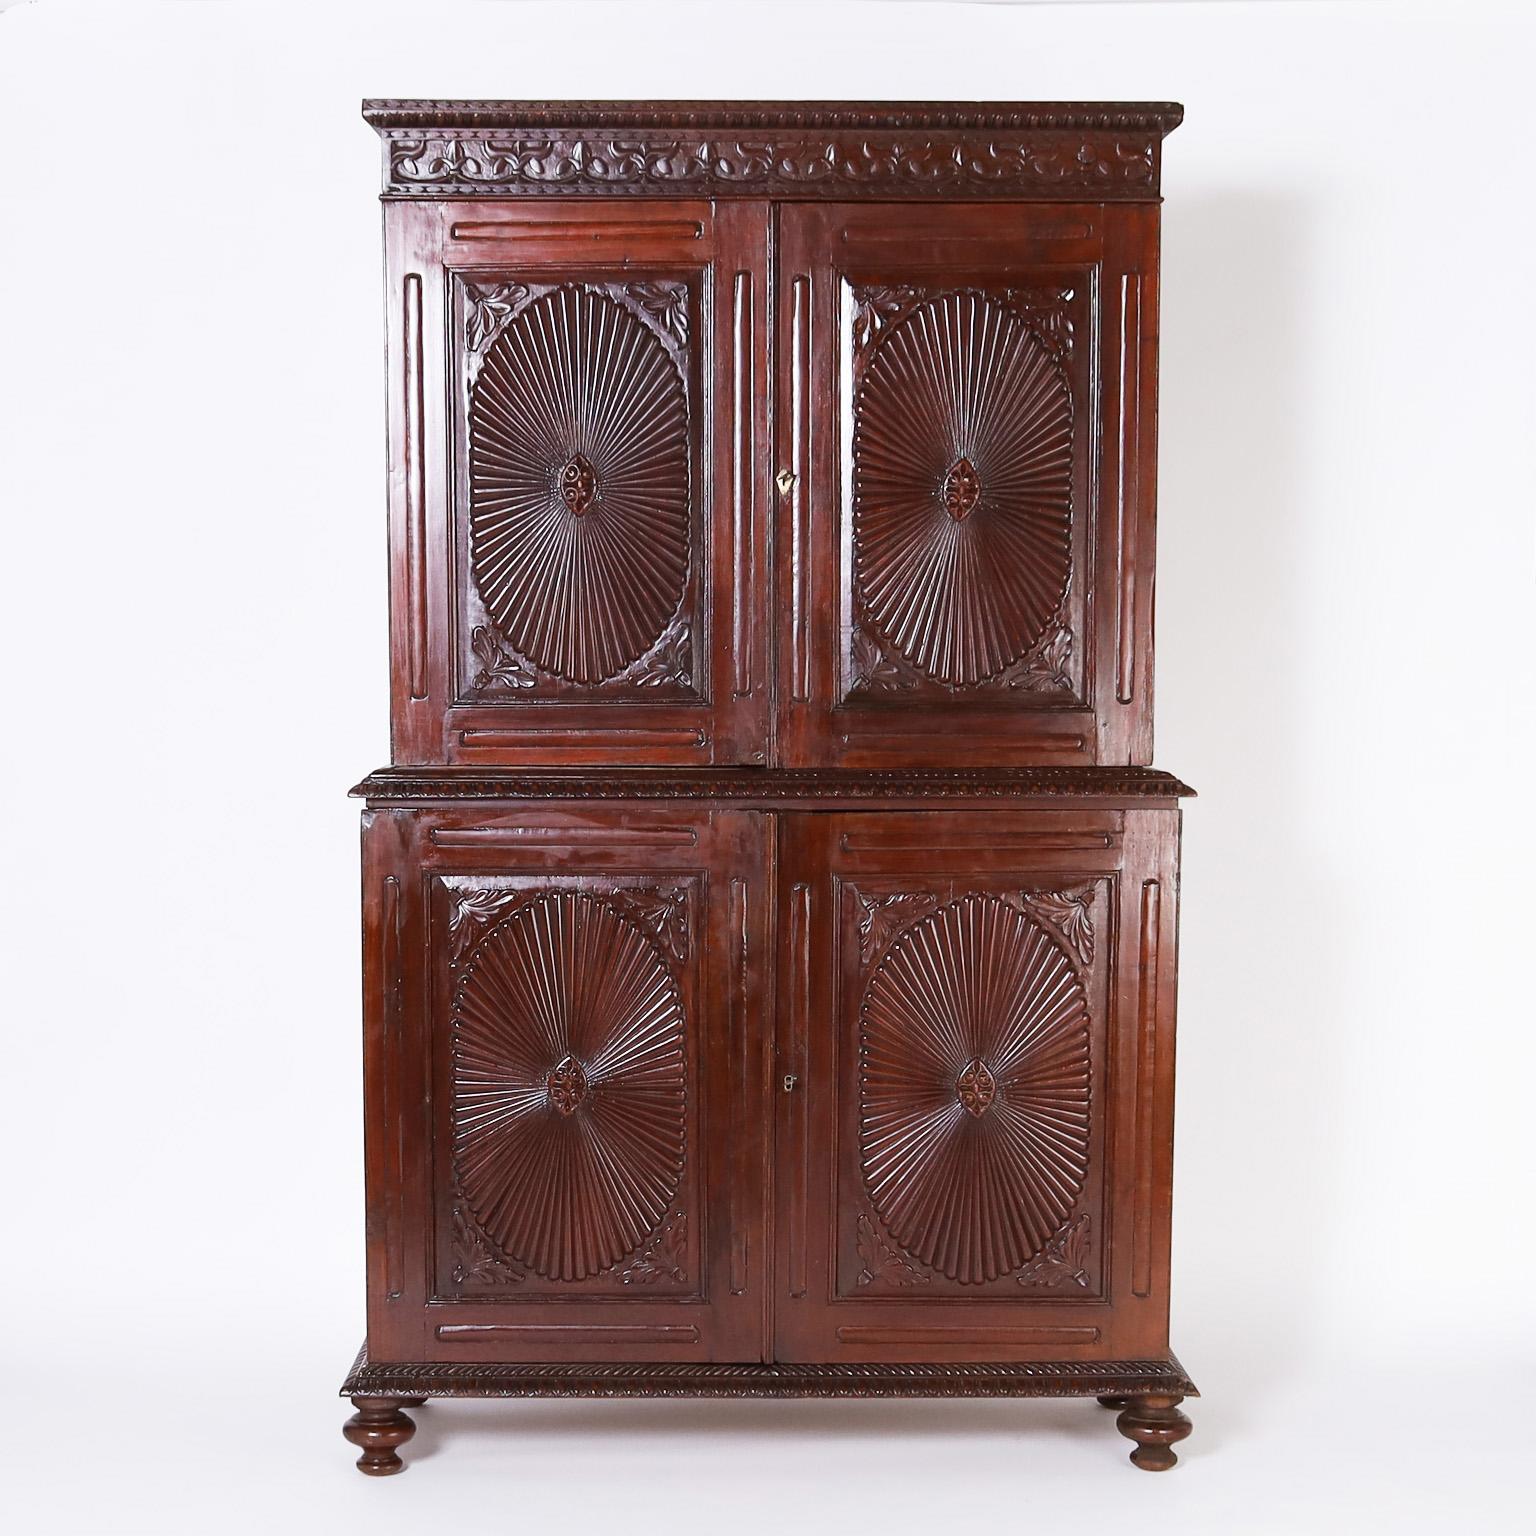 Rare and remarkable 19th century Indo Portuguese four door cabinet featuring an egg and dart top cornice over a floral carved band, four carved sunbursts on the front, plenty of storage inside, working keys and turned feet under a lower carved